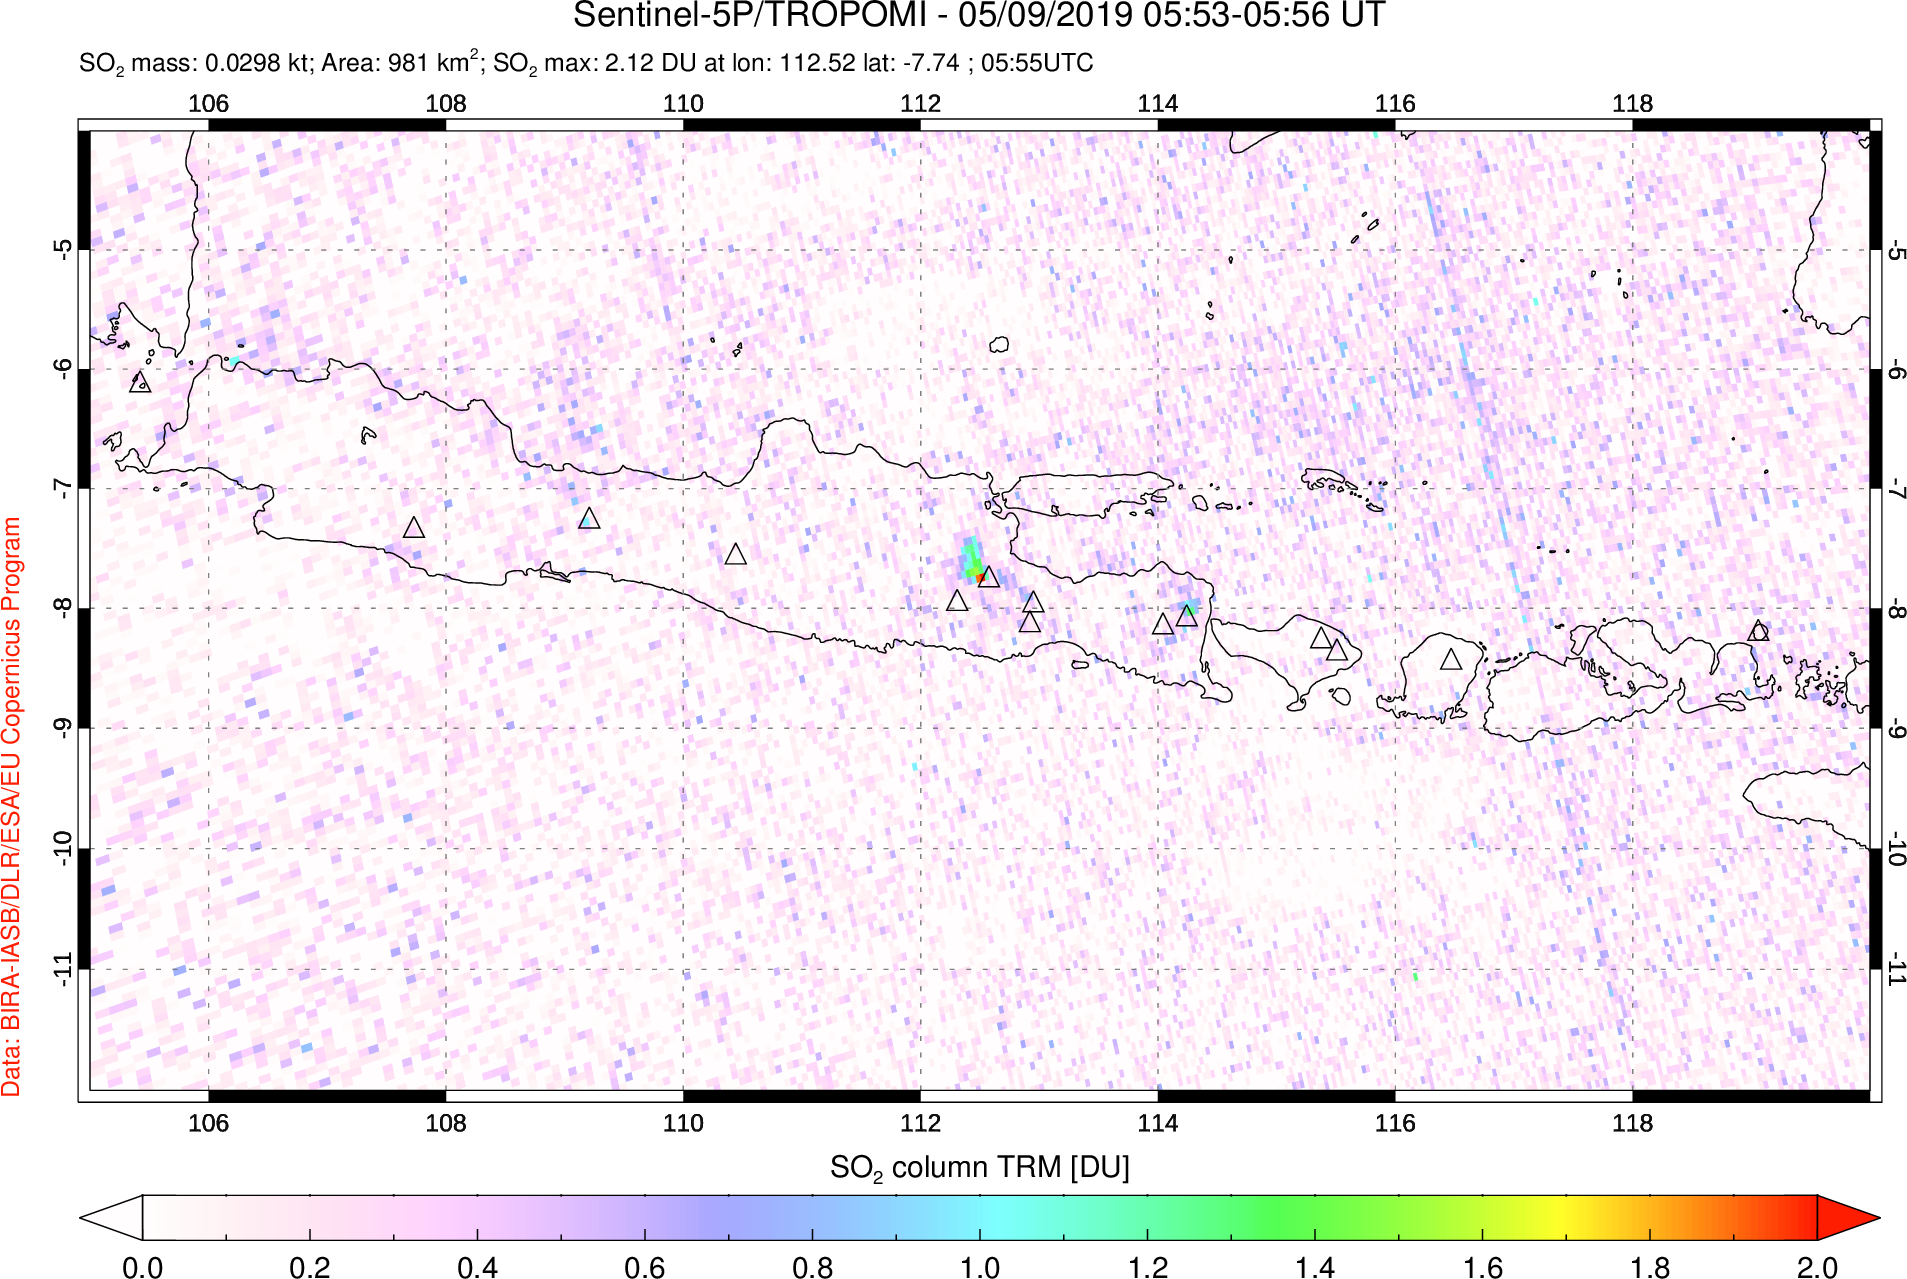 A sulfur dioxide image over Java, Indonesia on May 09, 2019.